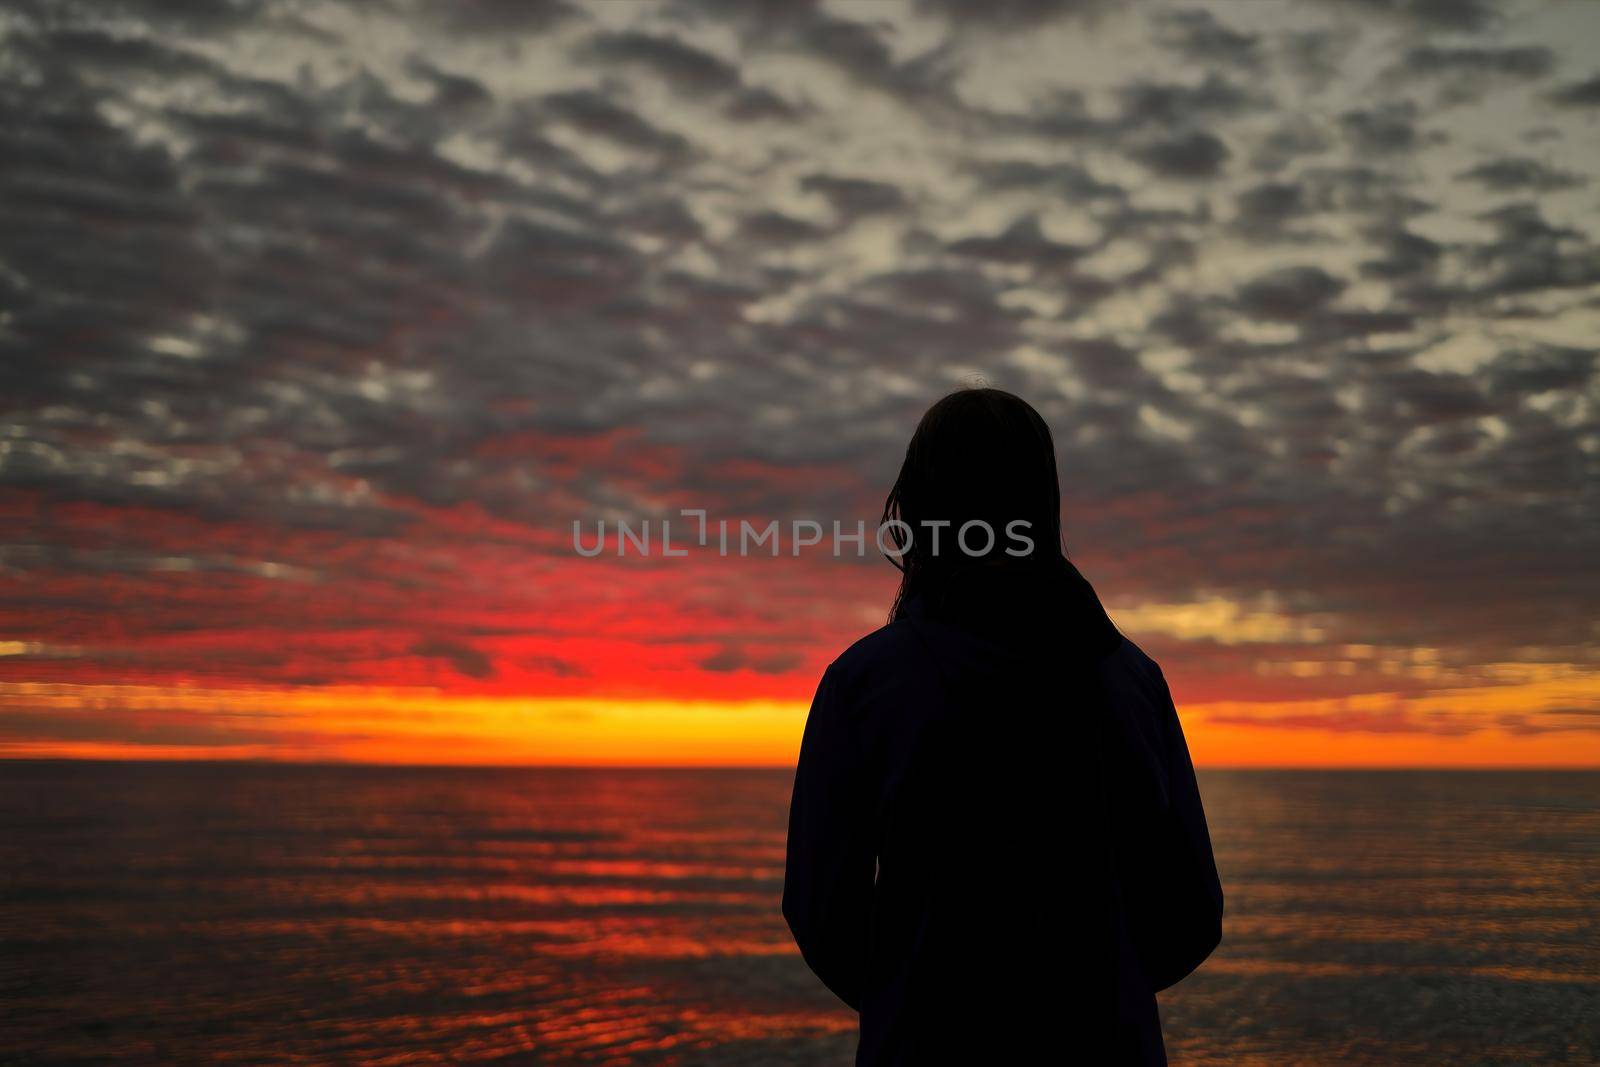 Silhouette of Young Adolescent Girl Looks in Awe, Wonder, and Admiration at a Magnificent Sunset Sky while Standing on Wasaga Beach with Georgian Bay in background. Rear View. High quality photo